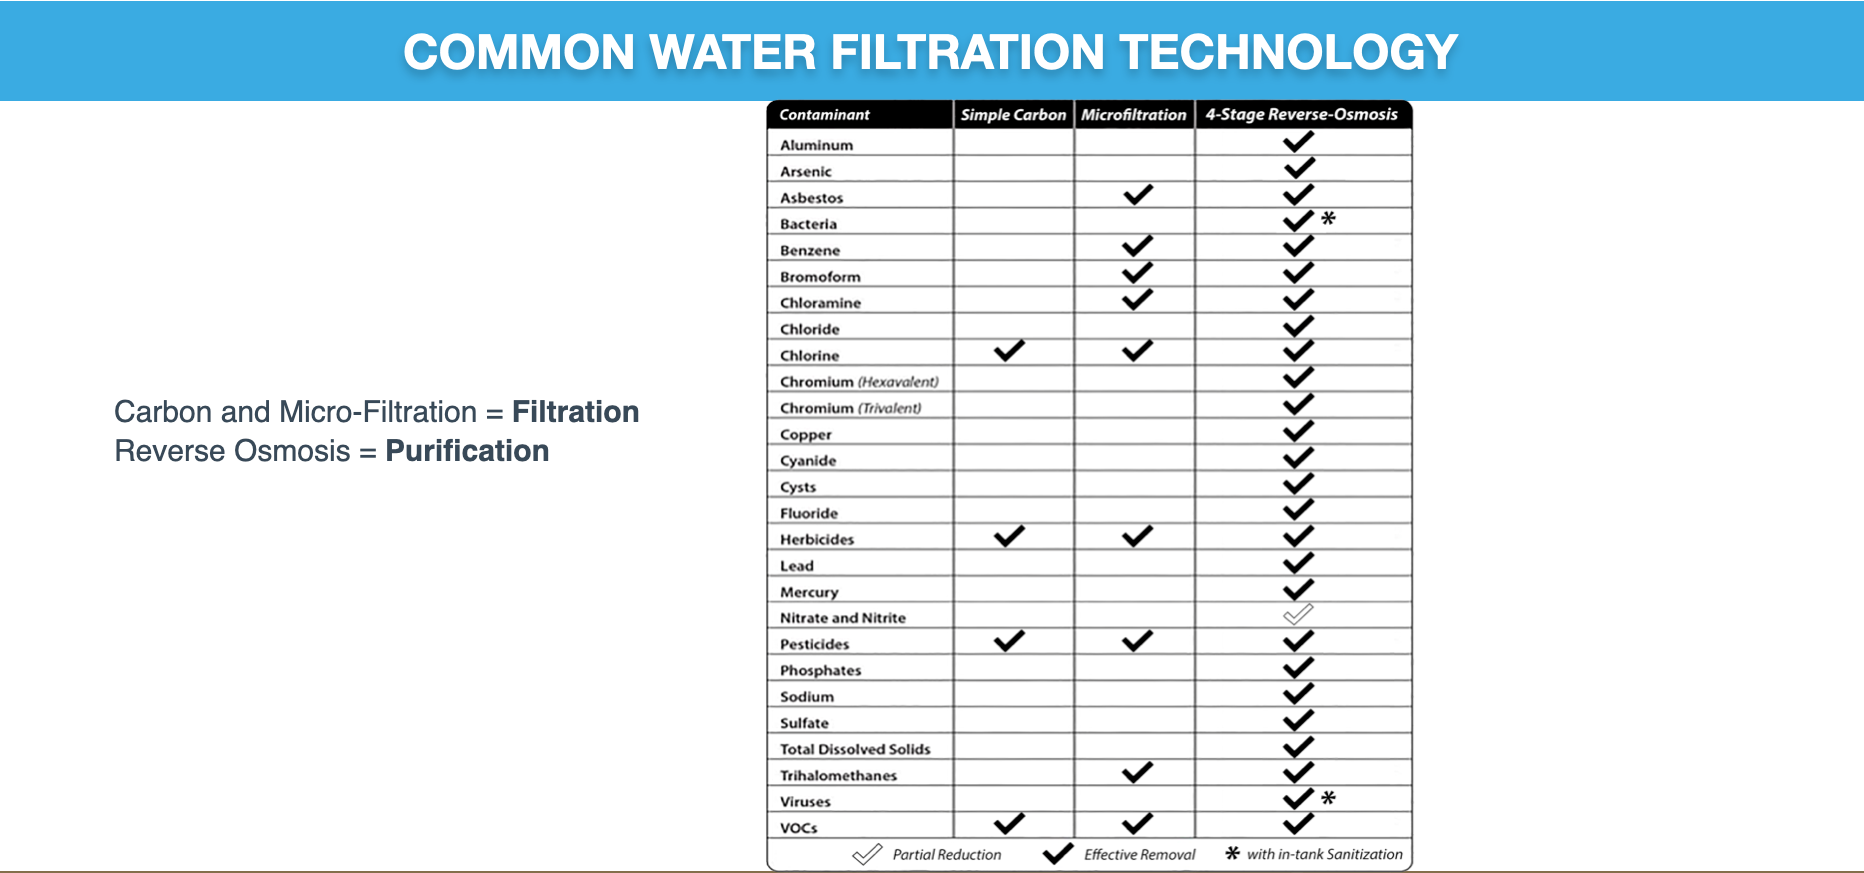 Common Water Filtration Technologies